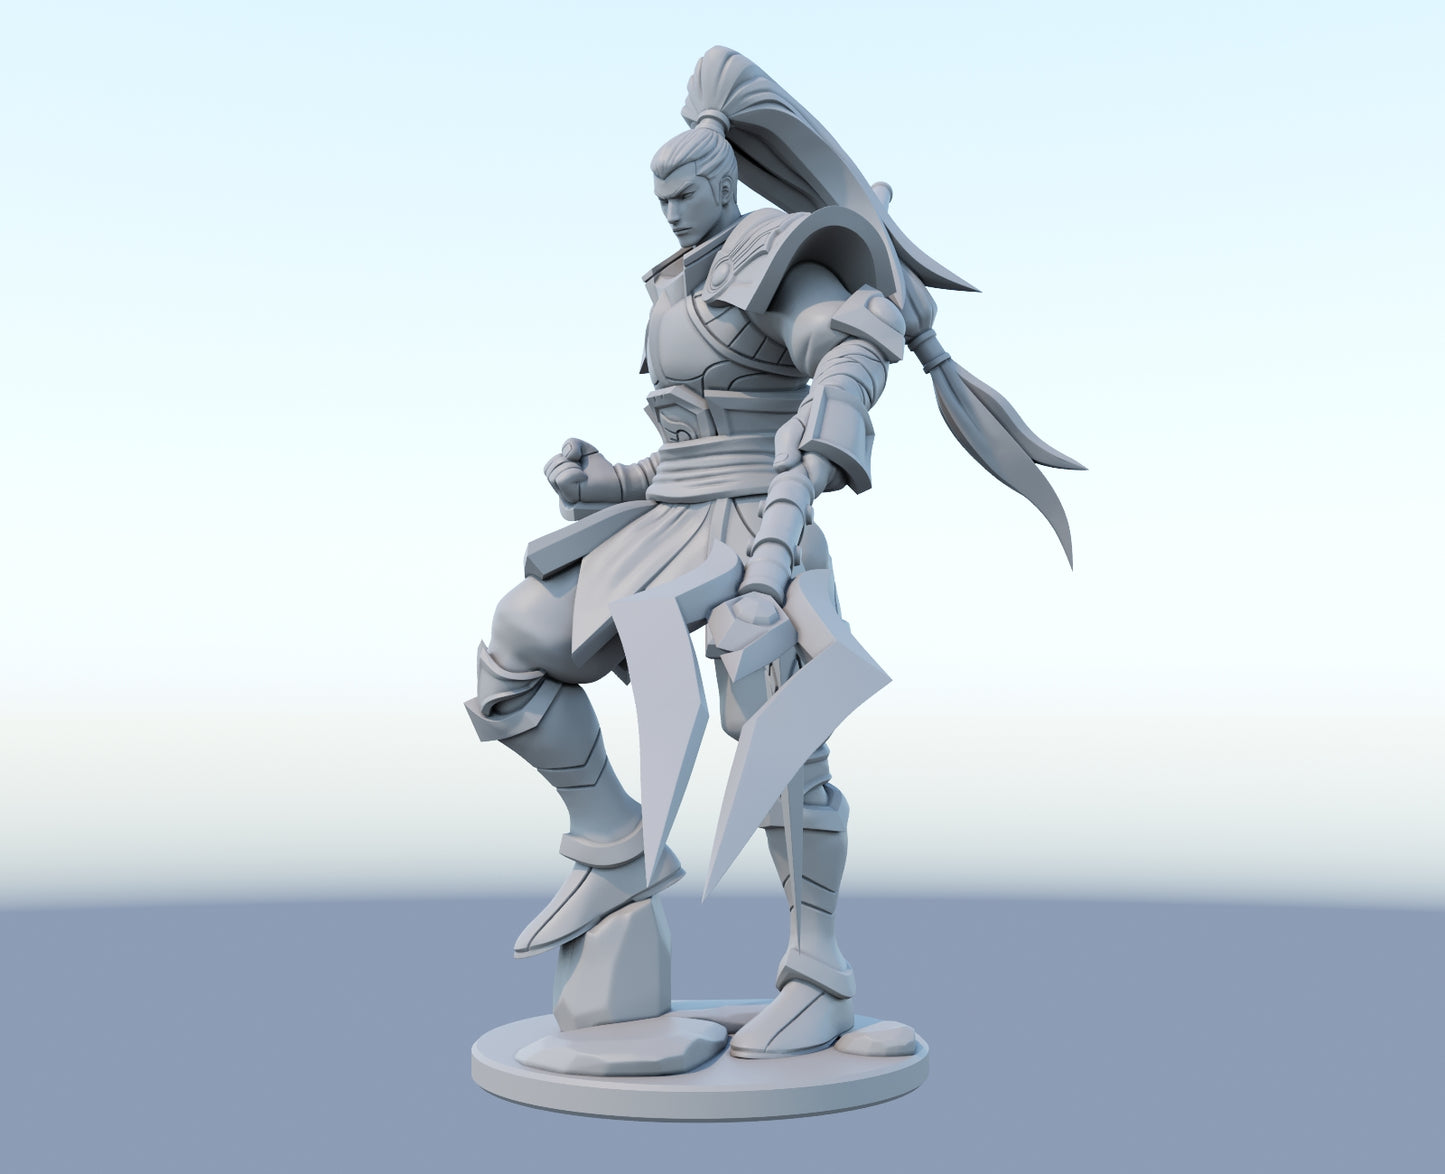 Xin Zhao 3D-printed League of Legends champion figure. Decorate your gaming setup or home with your favorite League of Legends champion! Choose between the unpainted version, perfect for you to paint yourself, or the hand-painted version by a professional painter. Order your figure today!